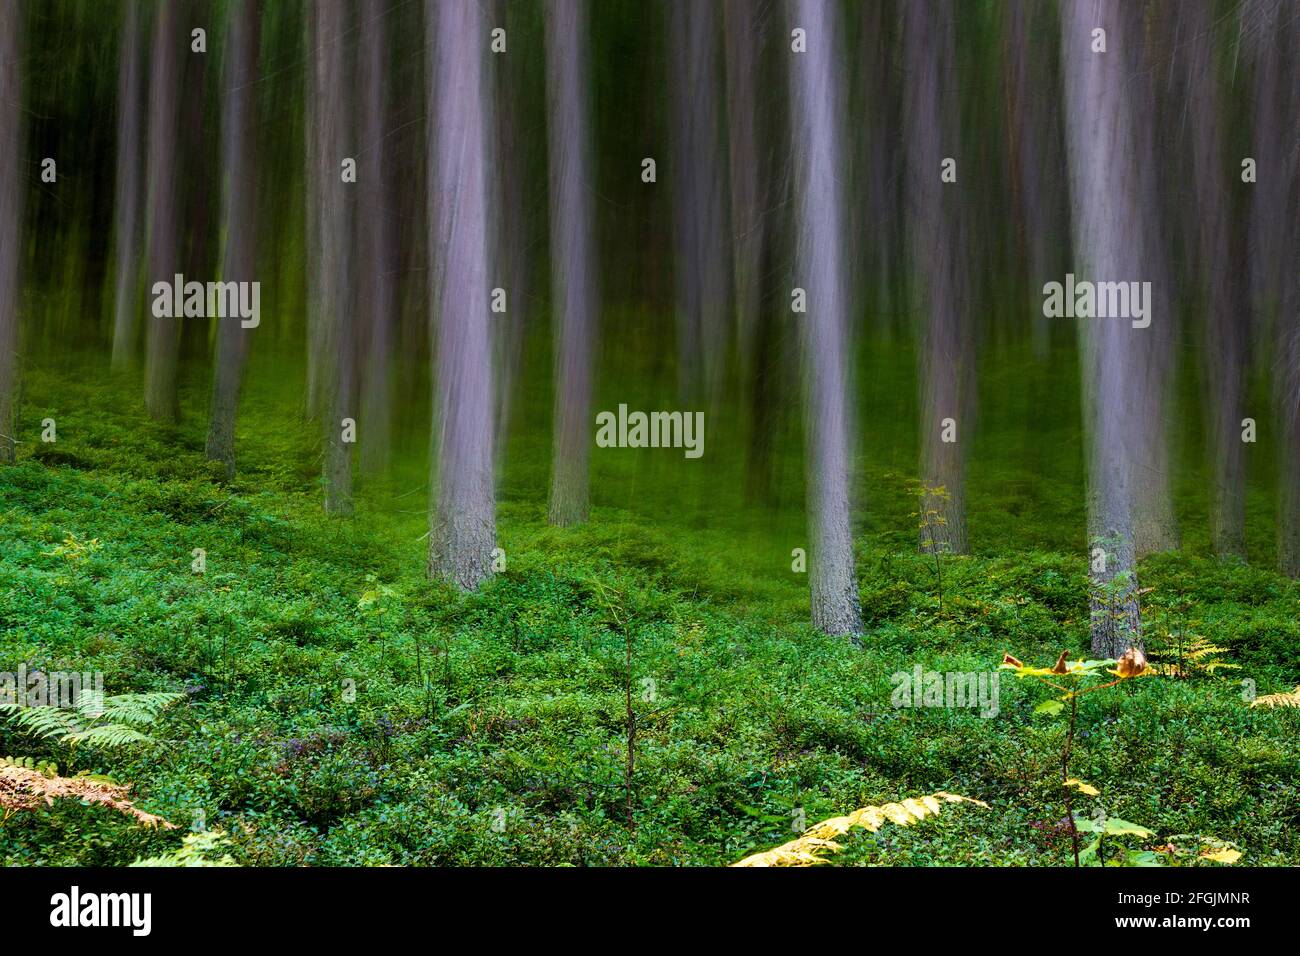 Austrian spruce woodland scenery with intentional camera blur Stock Photo